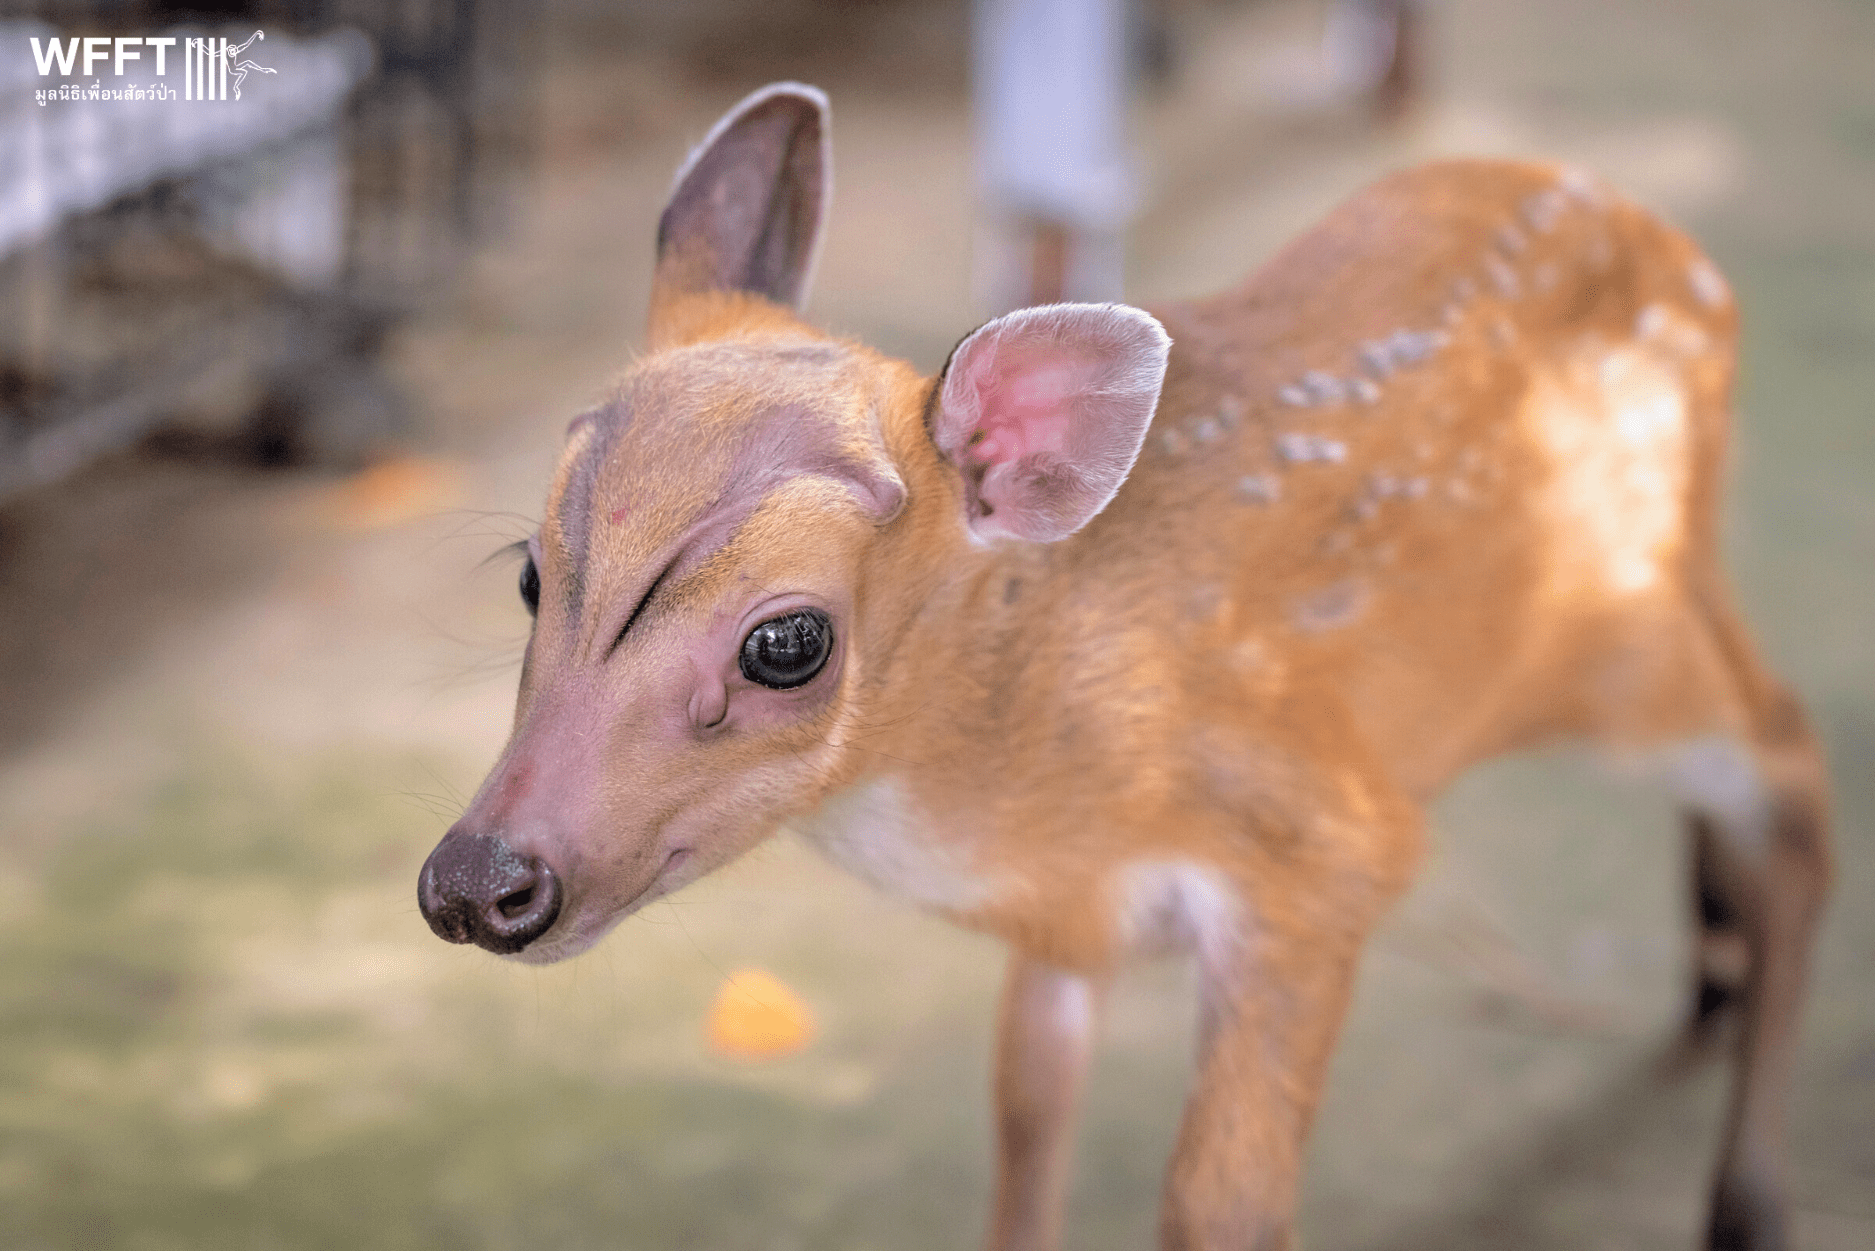 Just A Few Days Old, This Abandoned Baby Deer Is Now Safe At WFFT